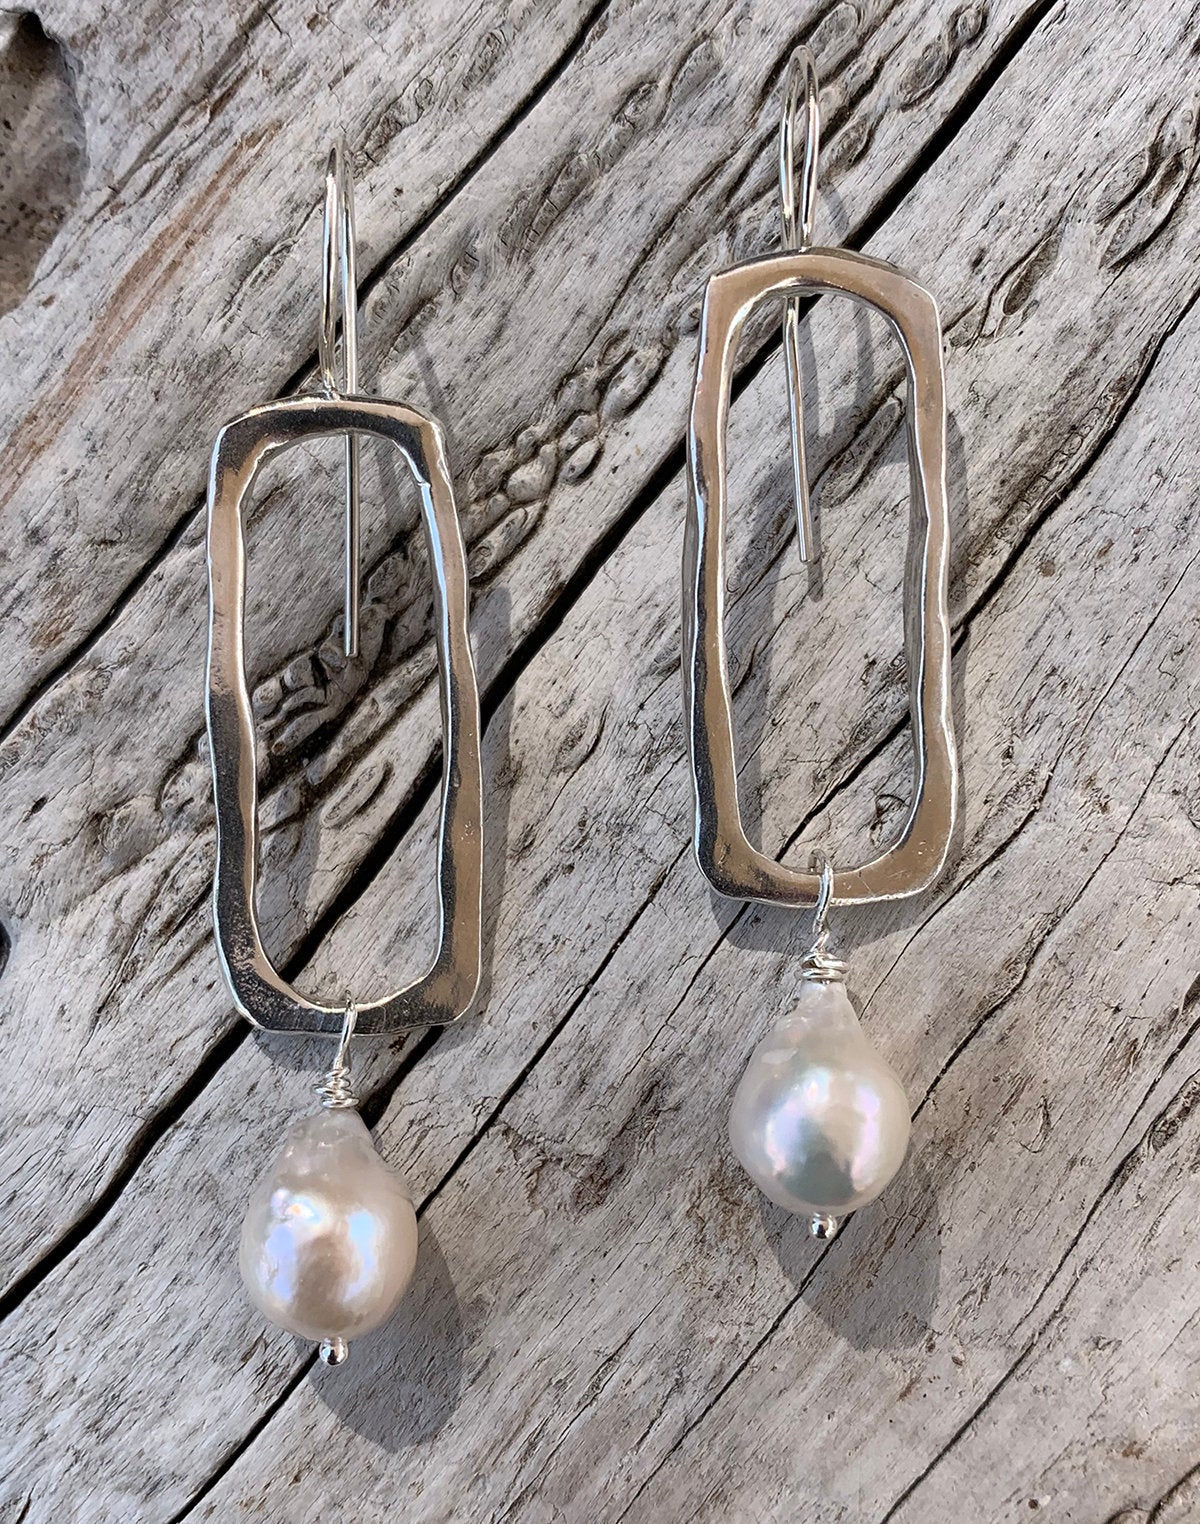 Handmade Sterling Silver Organic Rectangle Earrings with Flame Ball Pearl Drop